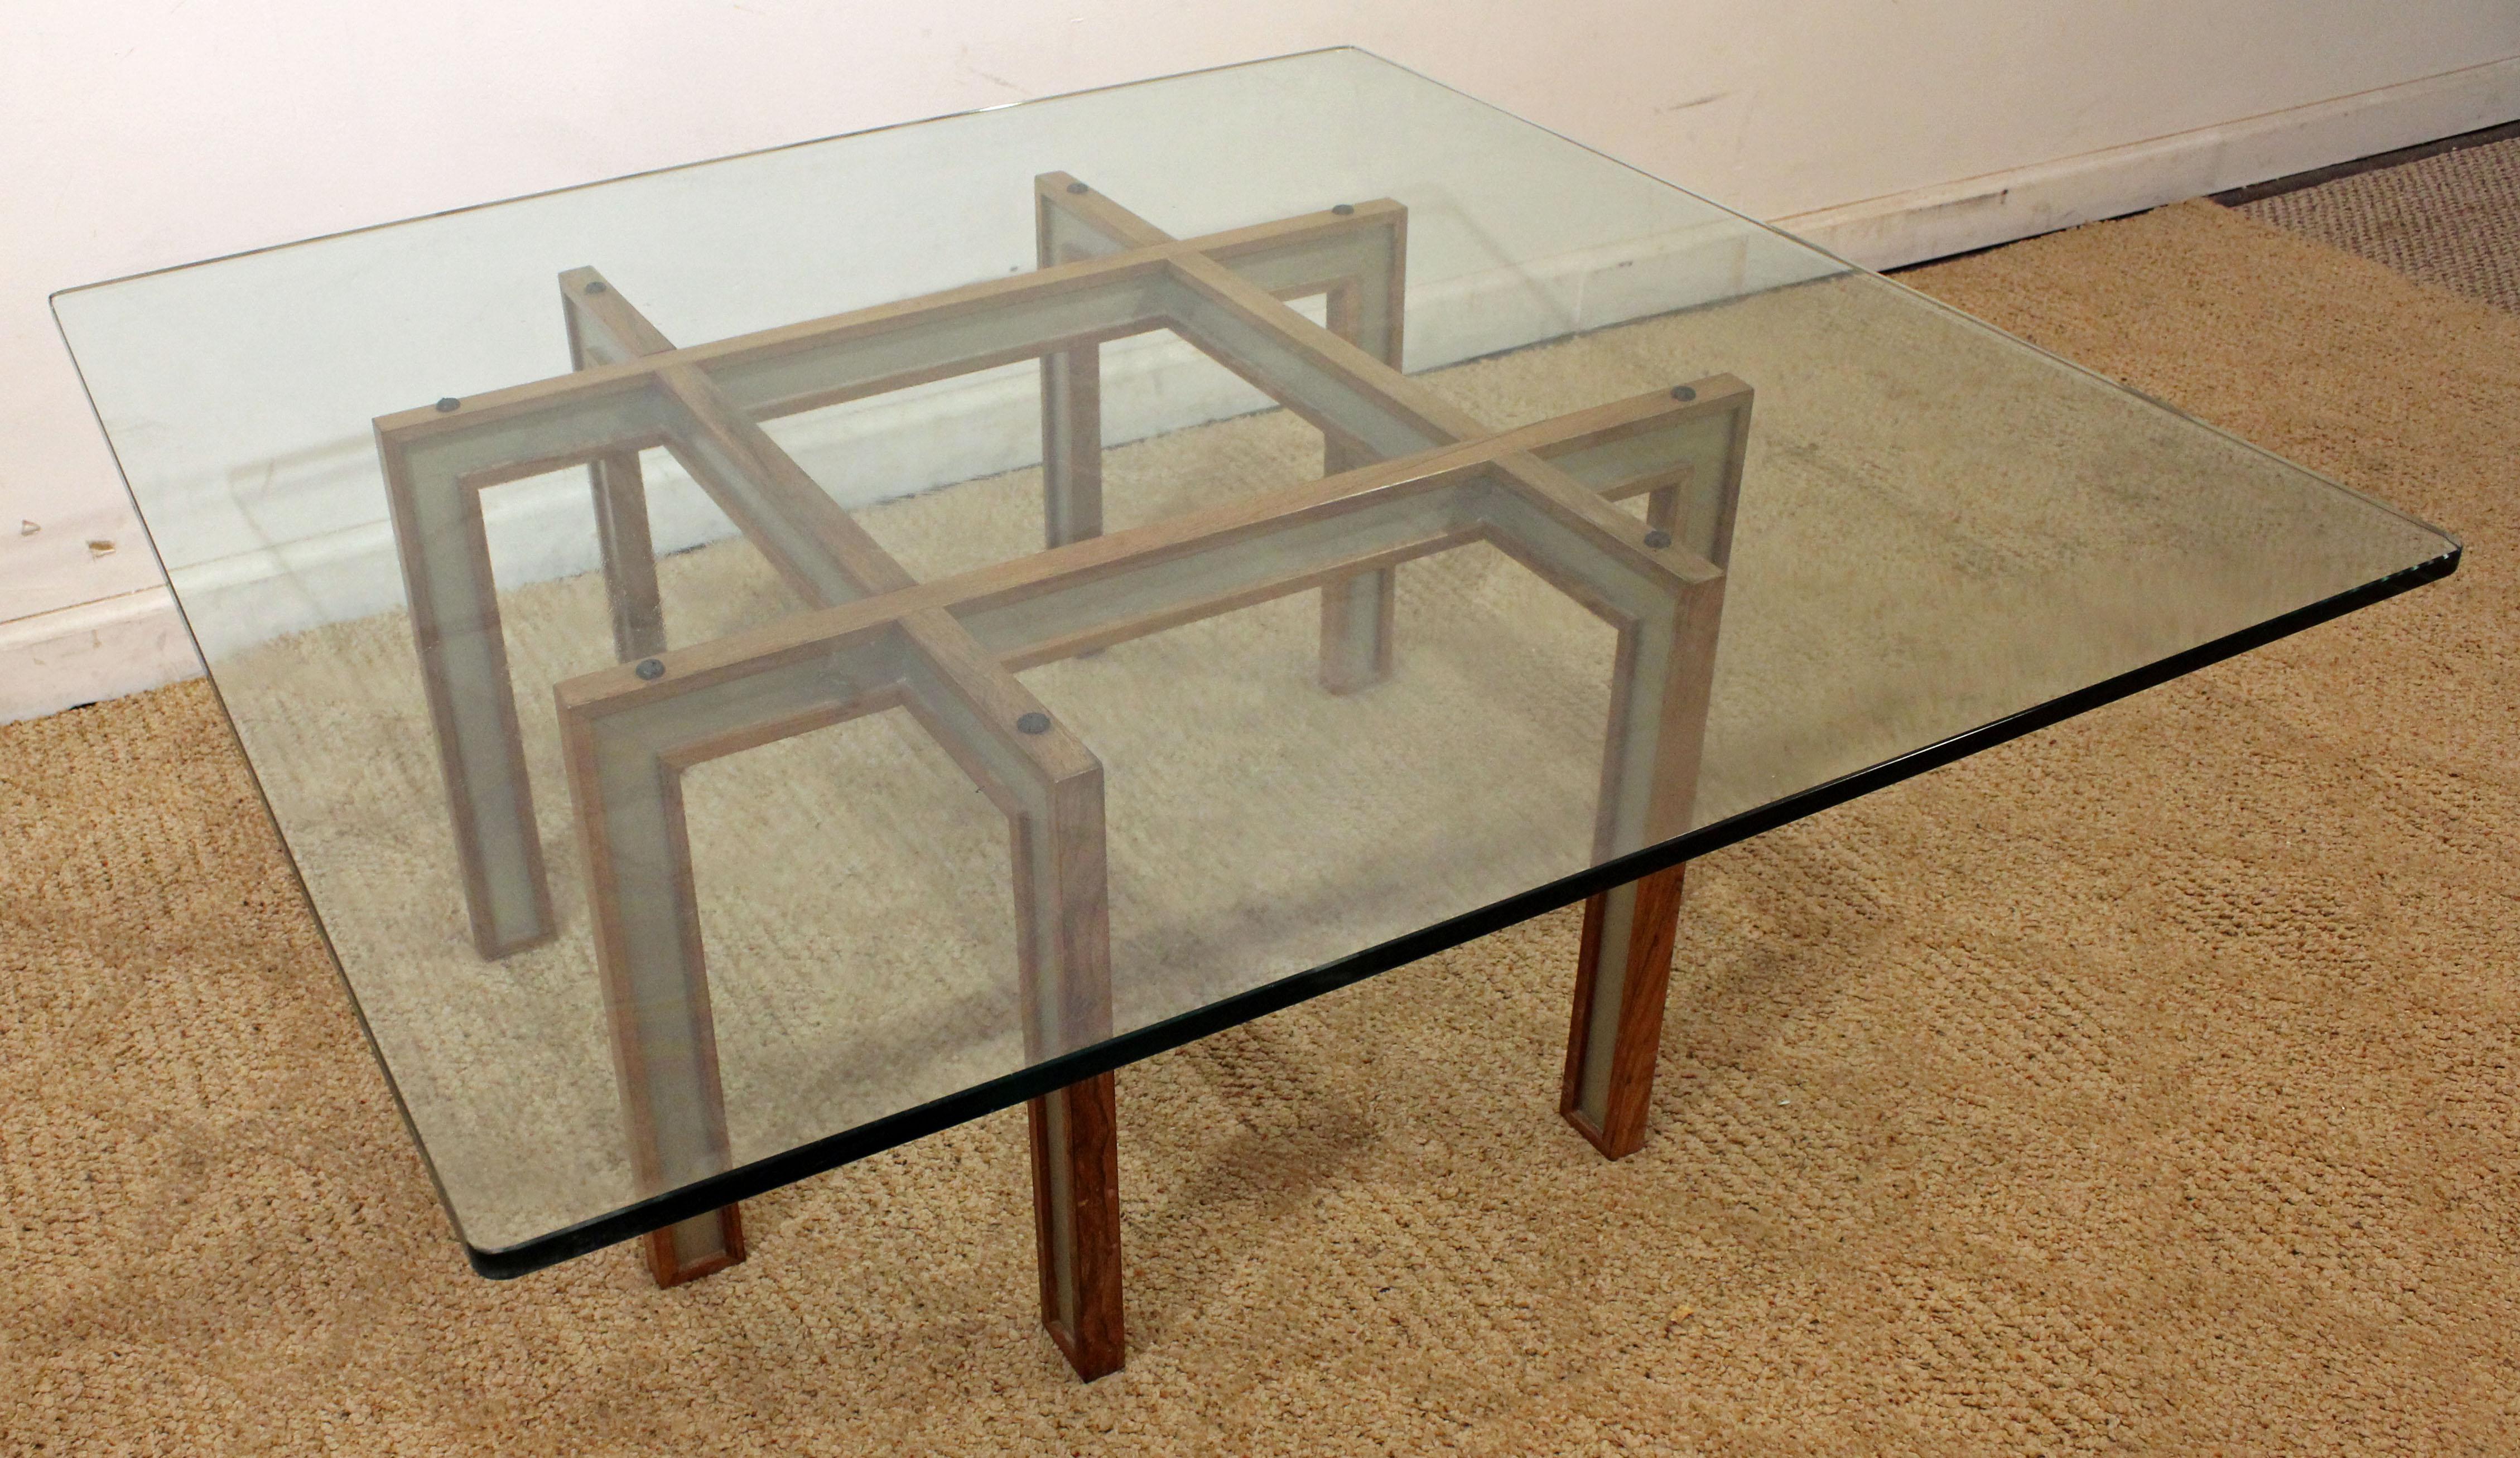 Offered is a very unique Mid-Century Modern coffee table. It has a wooden or aluminum base with a glass top. The table is in great condition, shows minor age wear. It is not marked.

Dimension:
42